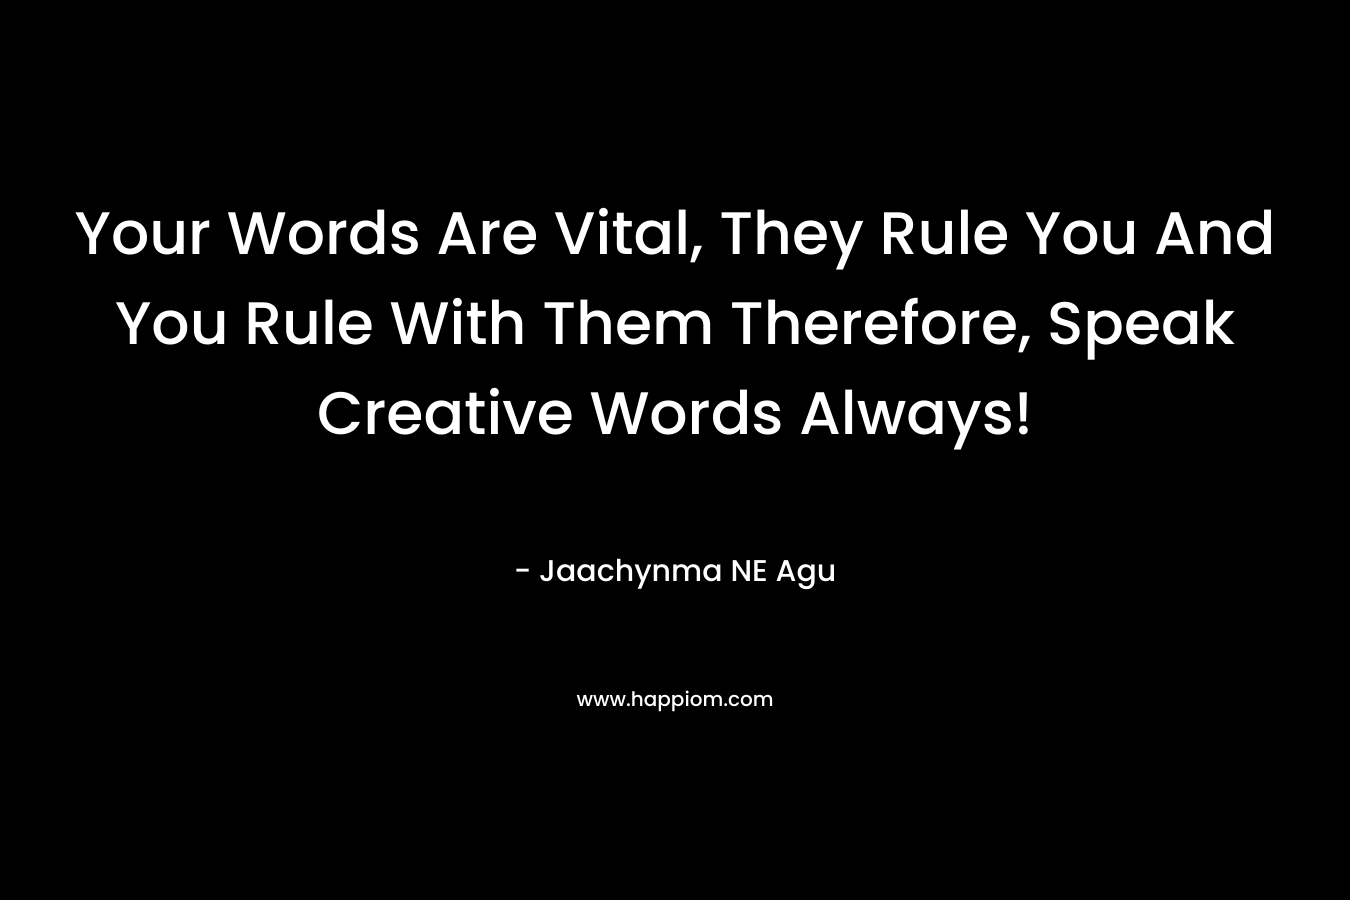 Your Words Are Vital, They Rule You And You Rule With Them Therefore, Speak Creative Words Always!